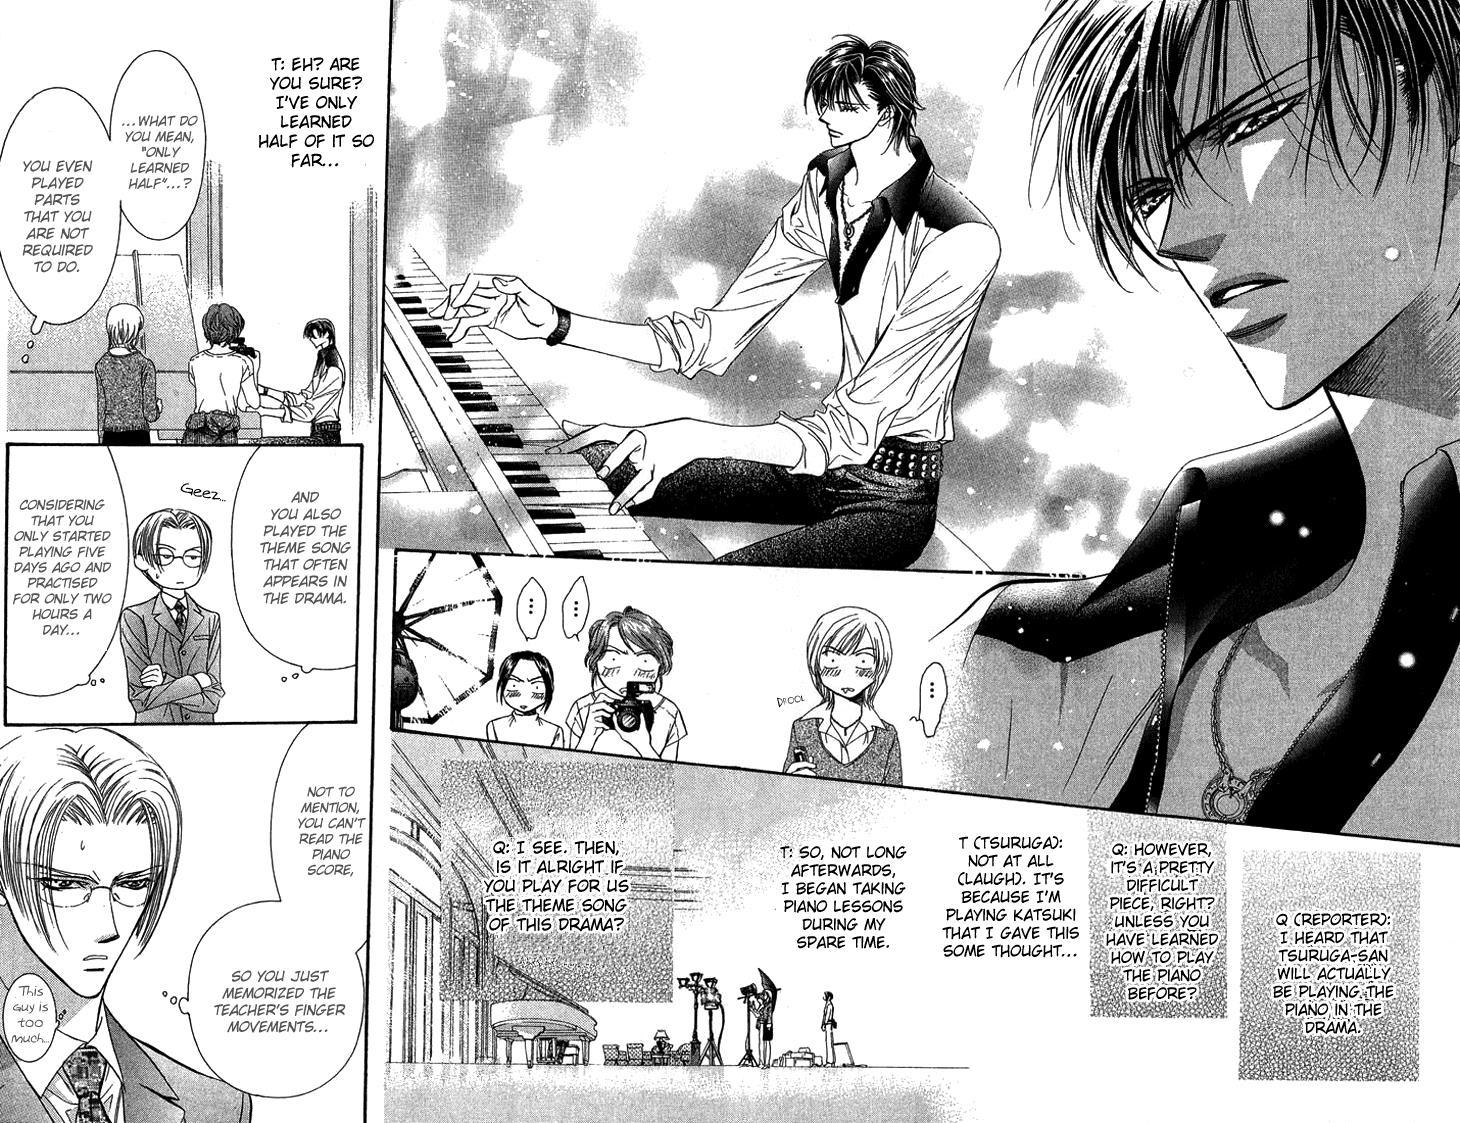 Skip Beat!, Chapter 79 Suddenly, a Love Story- Introduction image 27